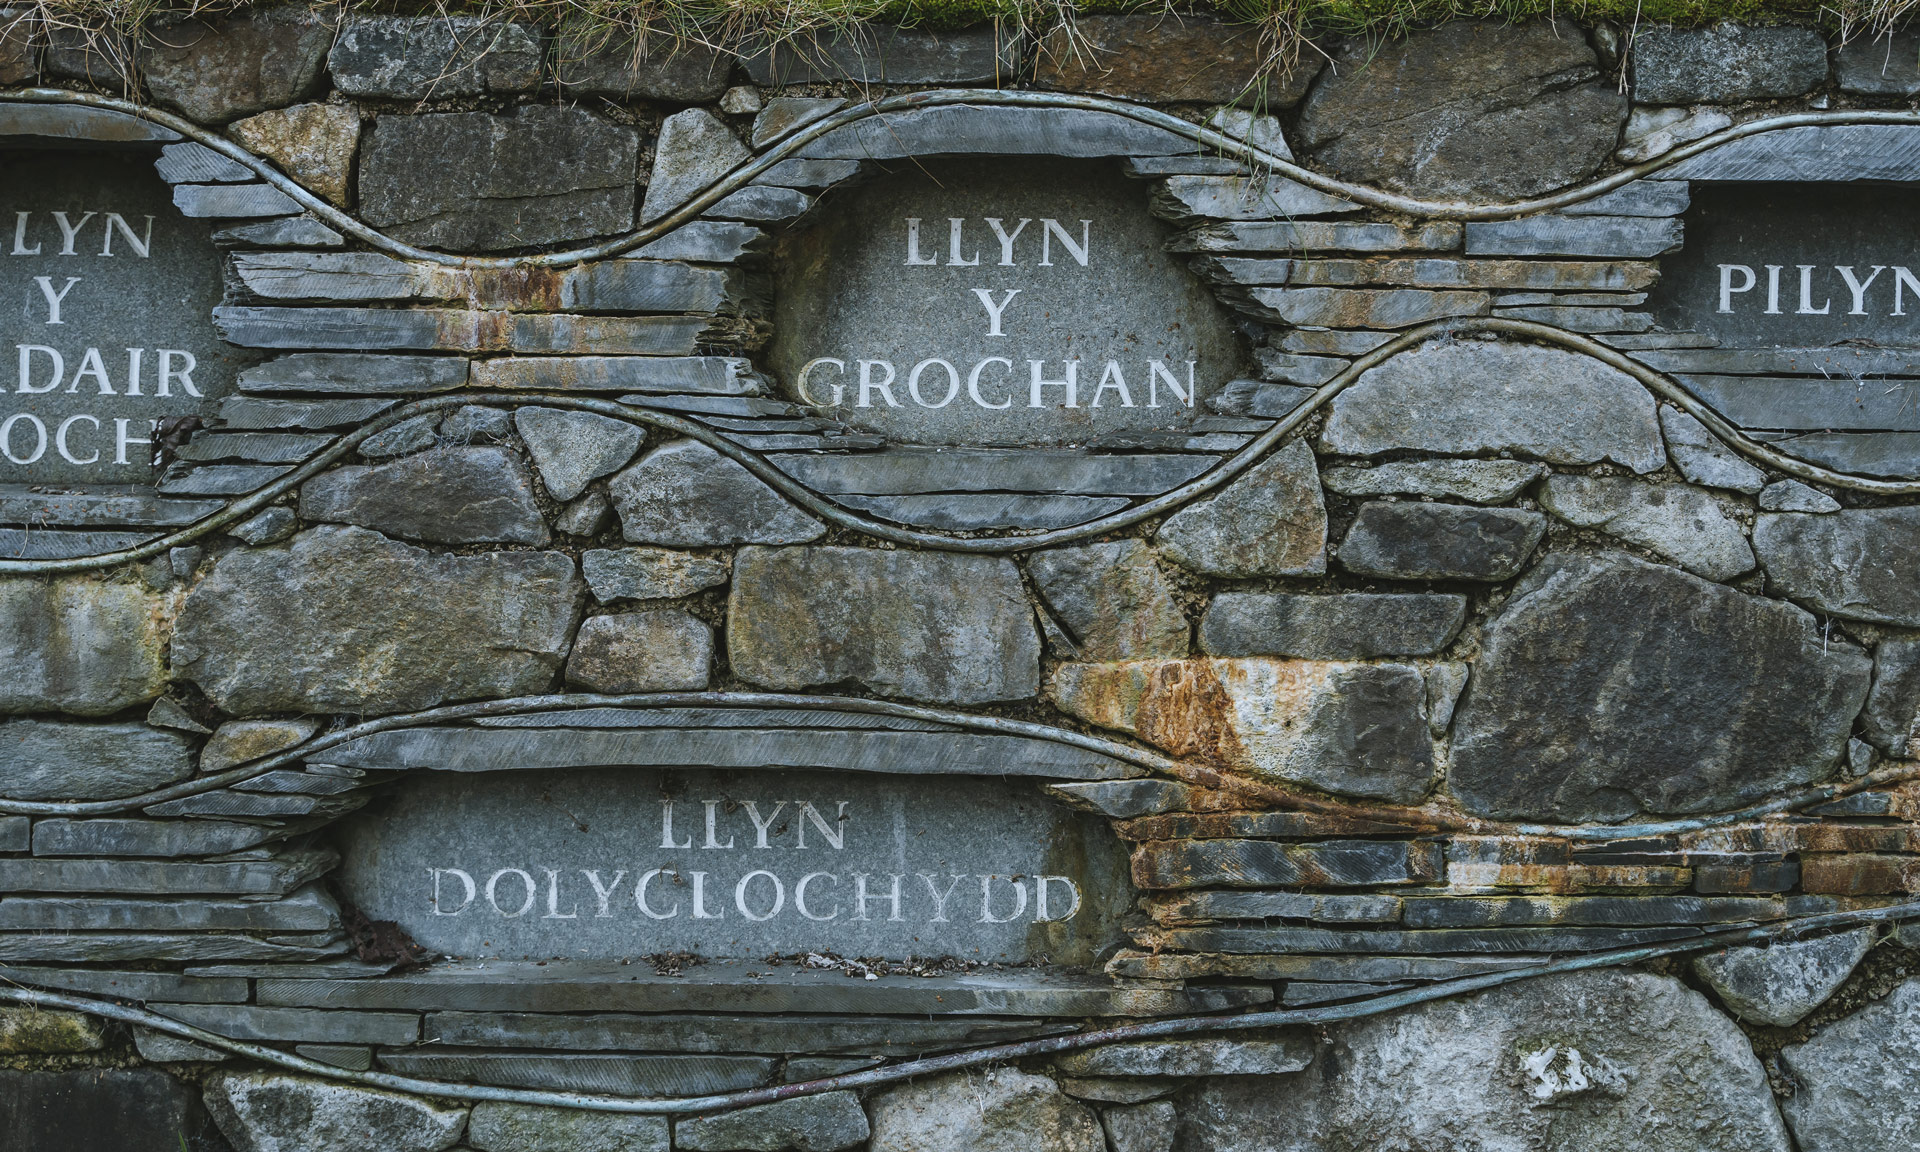 Welsh language lake names carved into stone